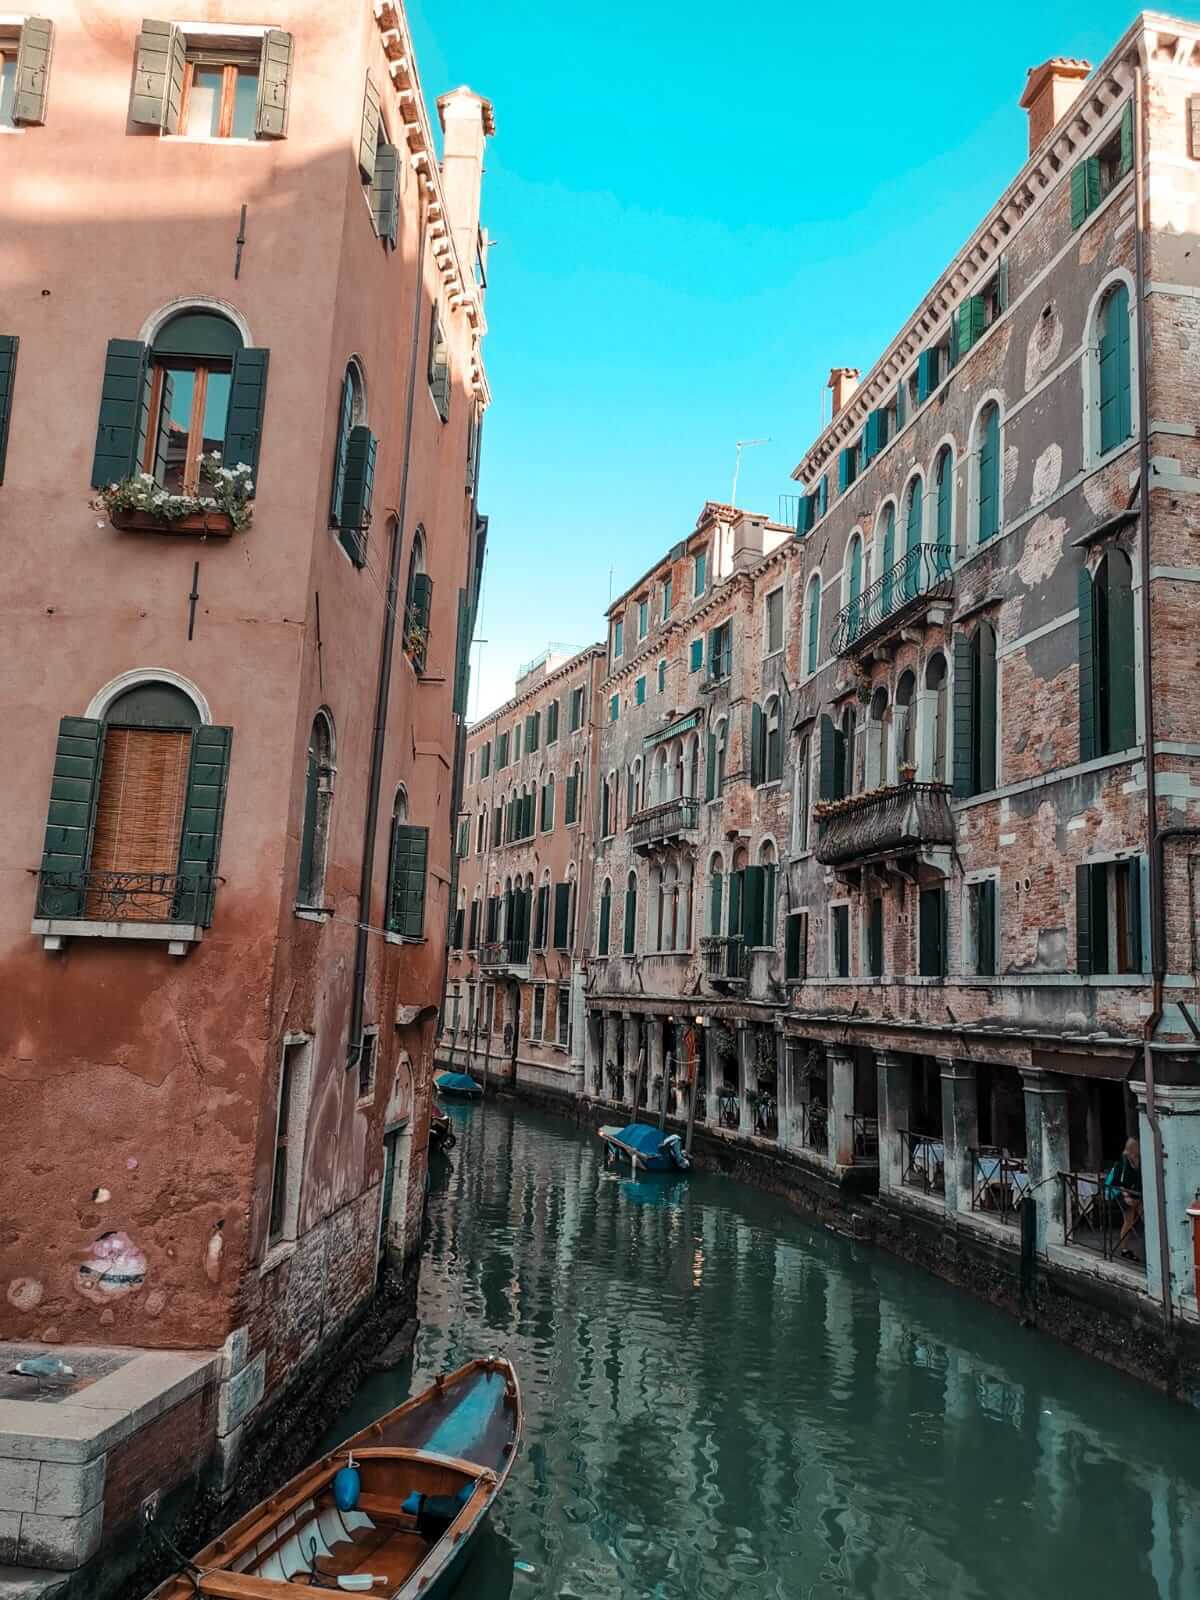 Discover the charms of Venice, the City of Masks